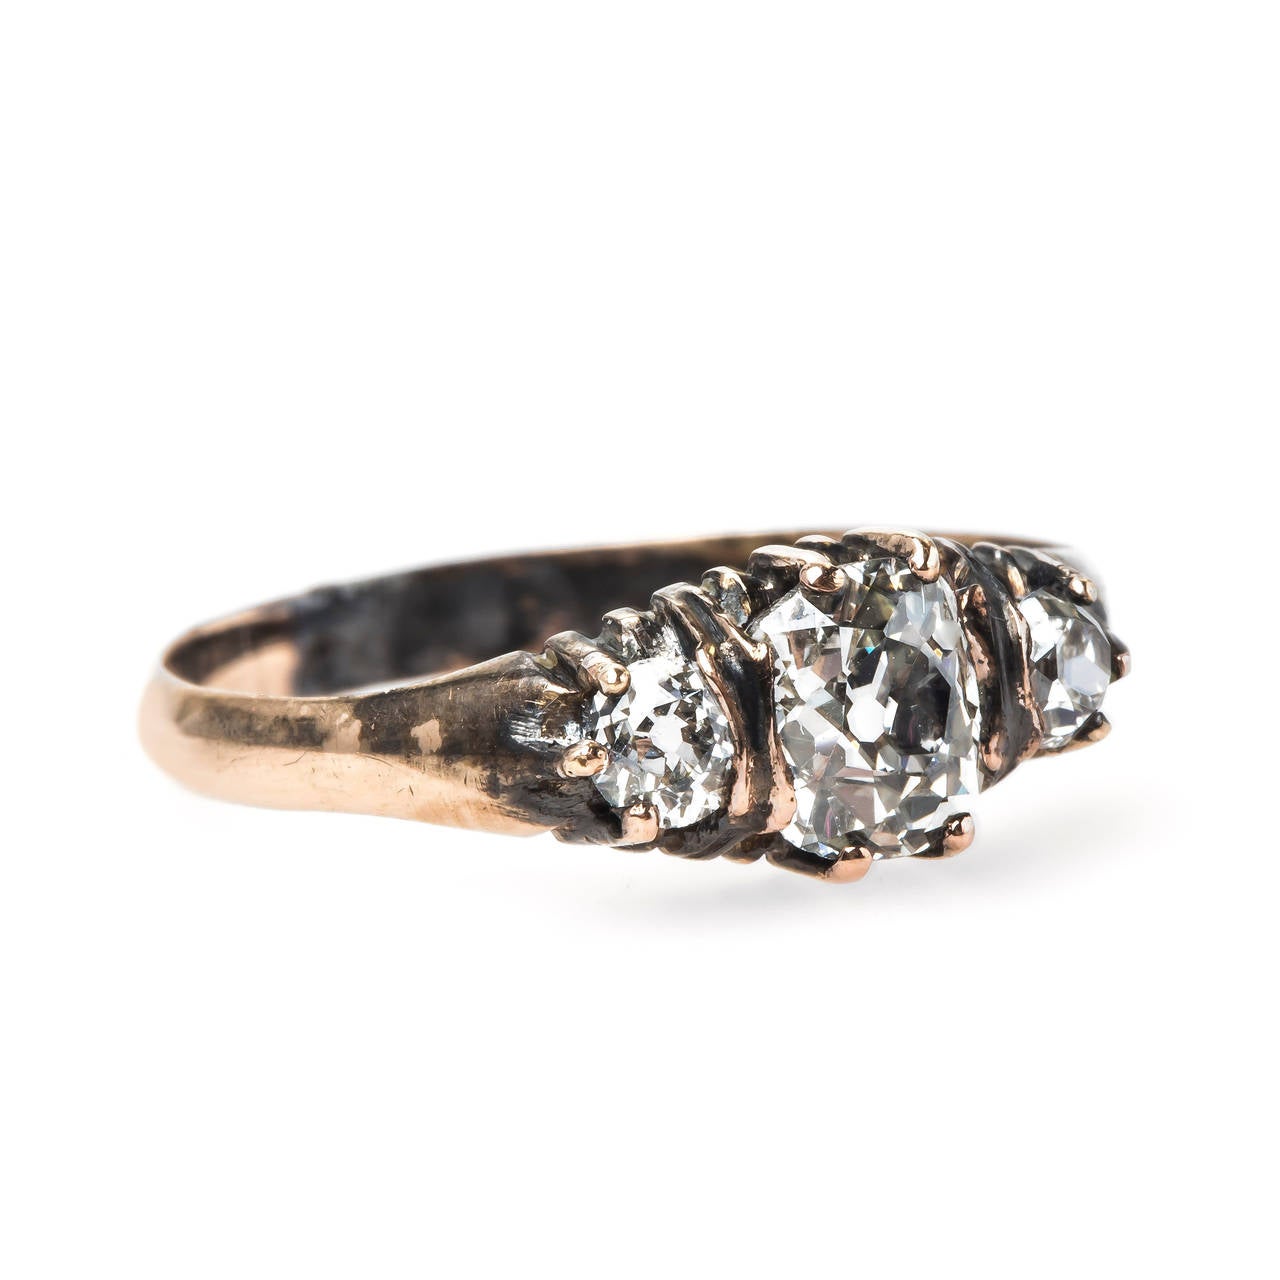 Elysian Park is a fabulous authentic Victorian era (circa 1880) 14k rose gold engagement ring featuring a winning three stone combination of diamonds. This unusual ring centers a 0.78ct EGL certified Old Mine Brilliant Cut diamond graded J color and